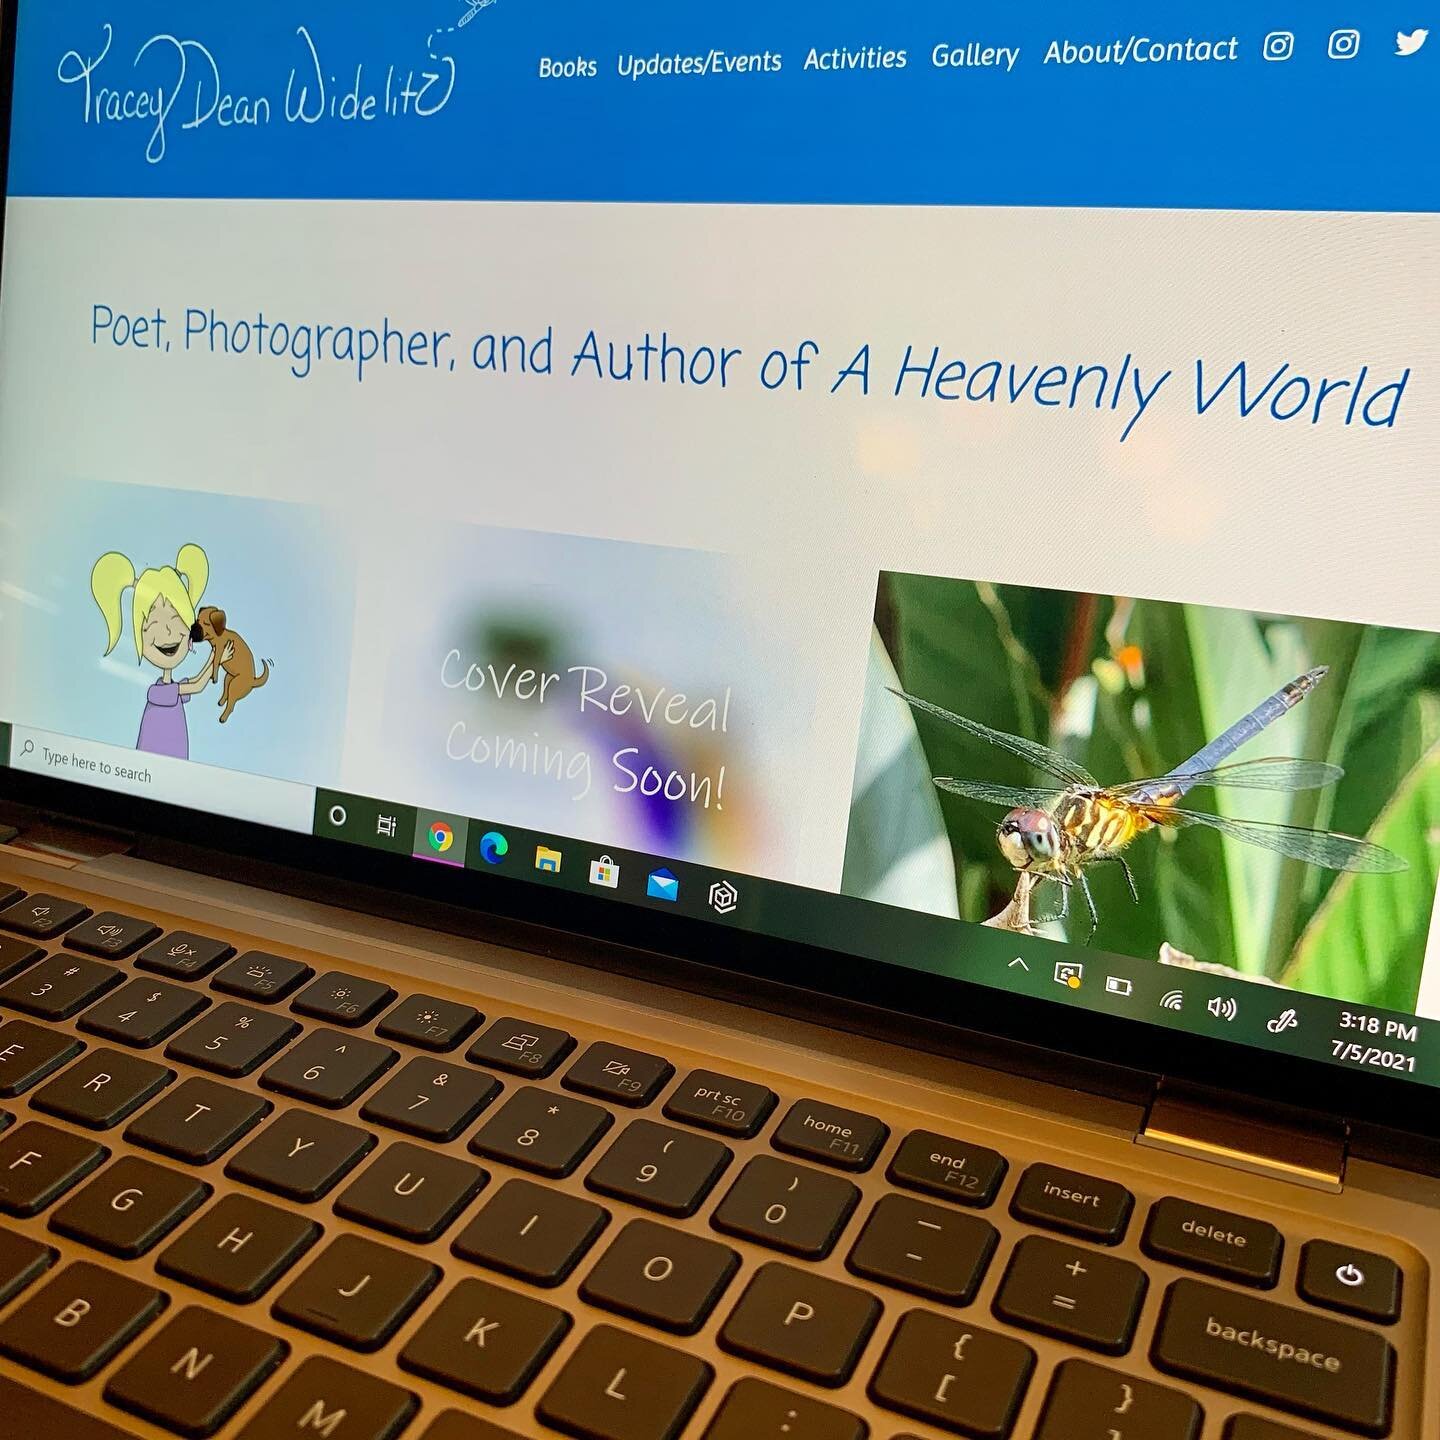 IT&rsquo;S HERE!!!
I am delighted to announce the launch of my new website! Please kick back and take a wide-eyed view!
For continuous updates on my upcoming published children&rsquo;s book, &ldquo;A Heavenly World&rdquo;, as well as a few coloring p